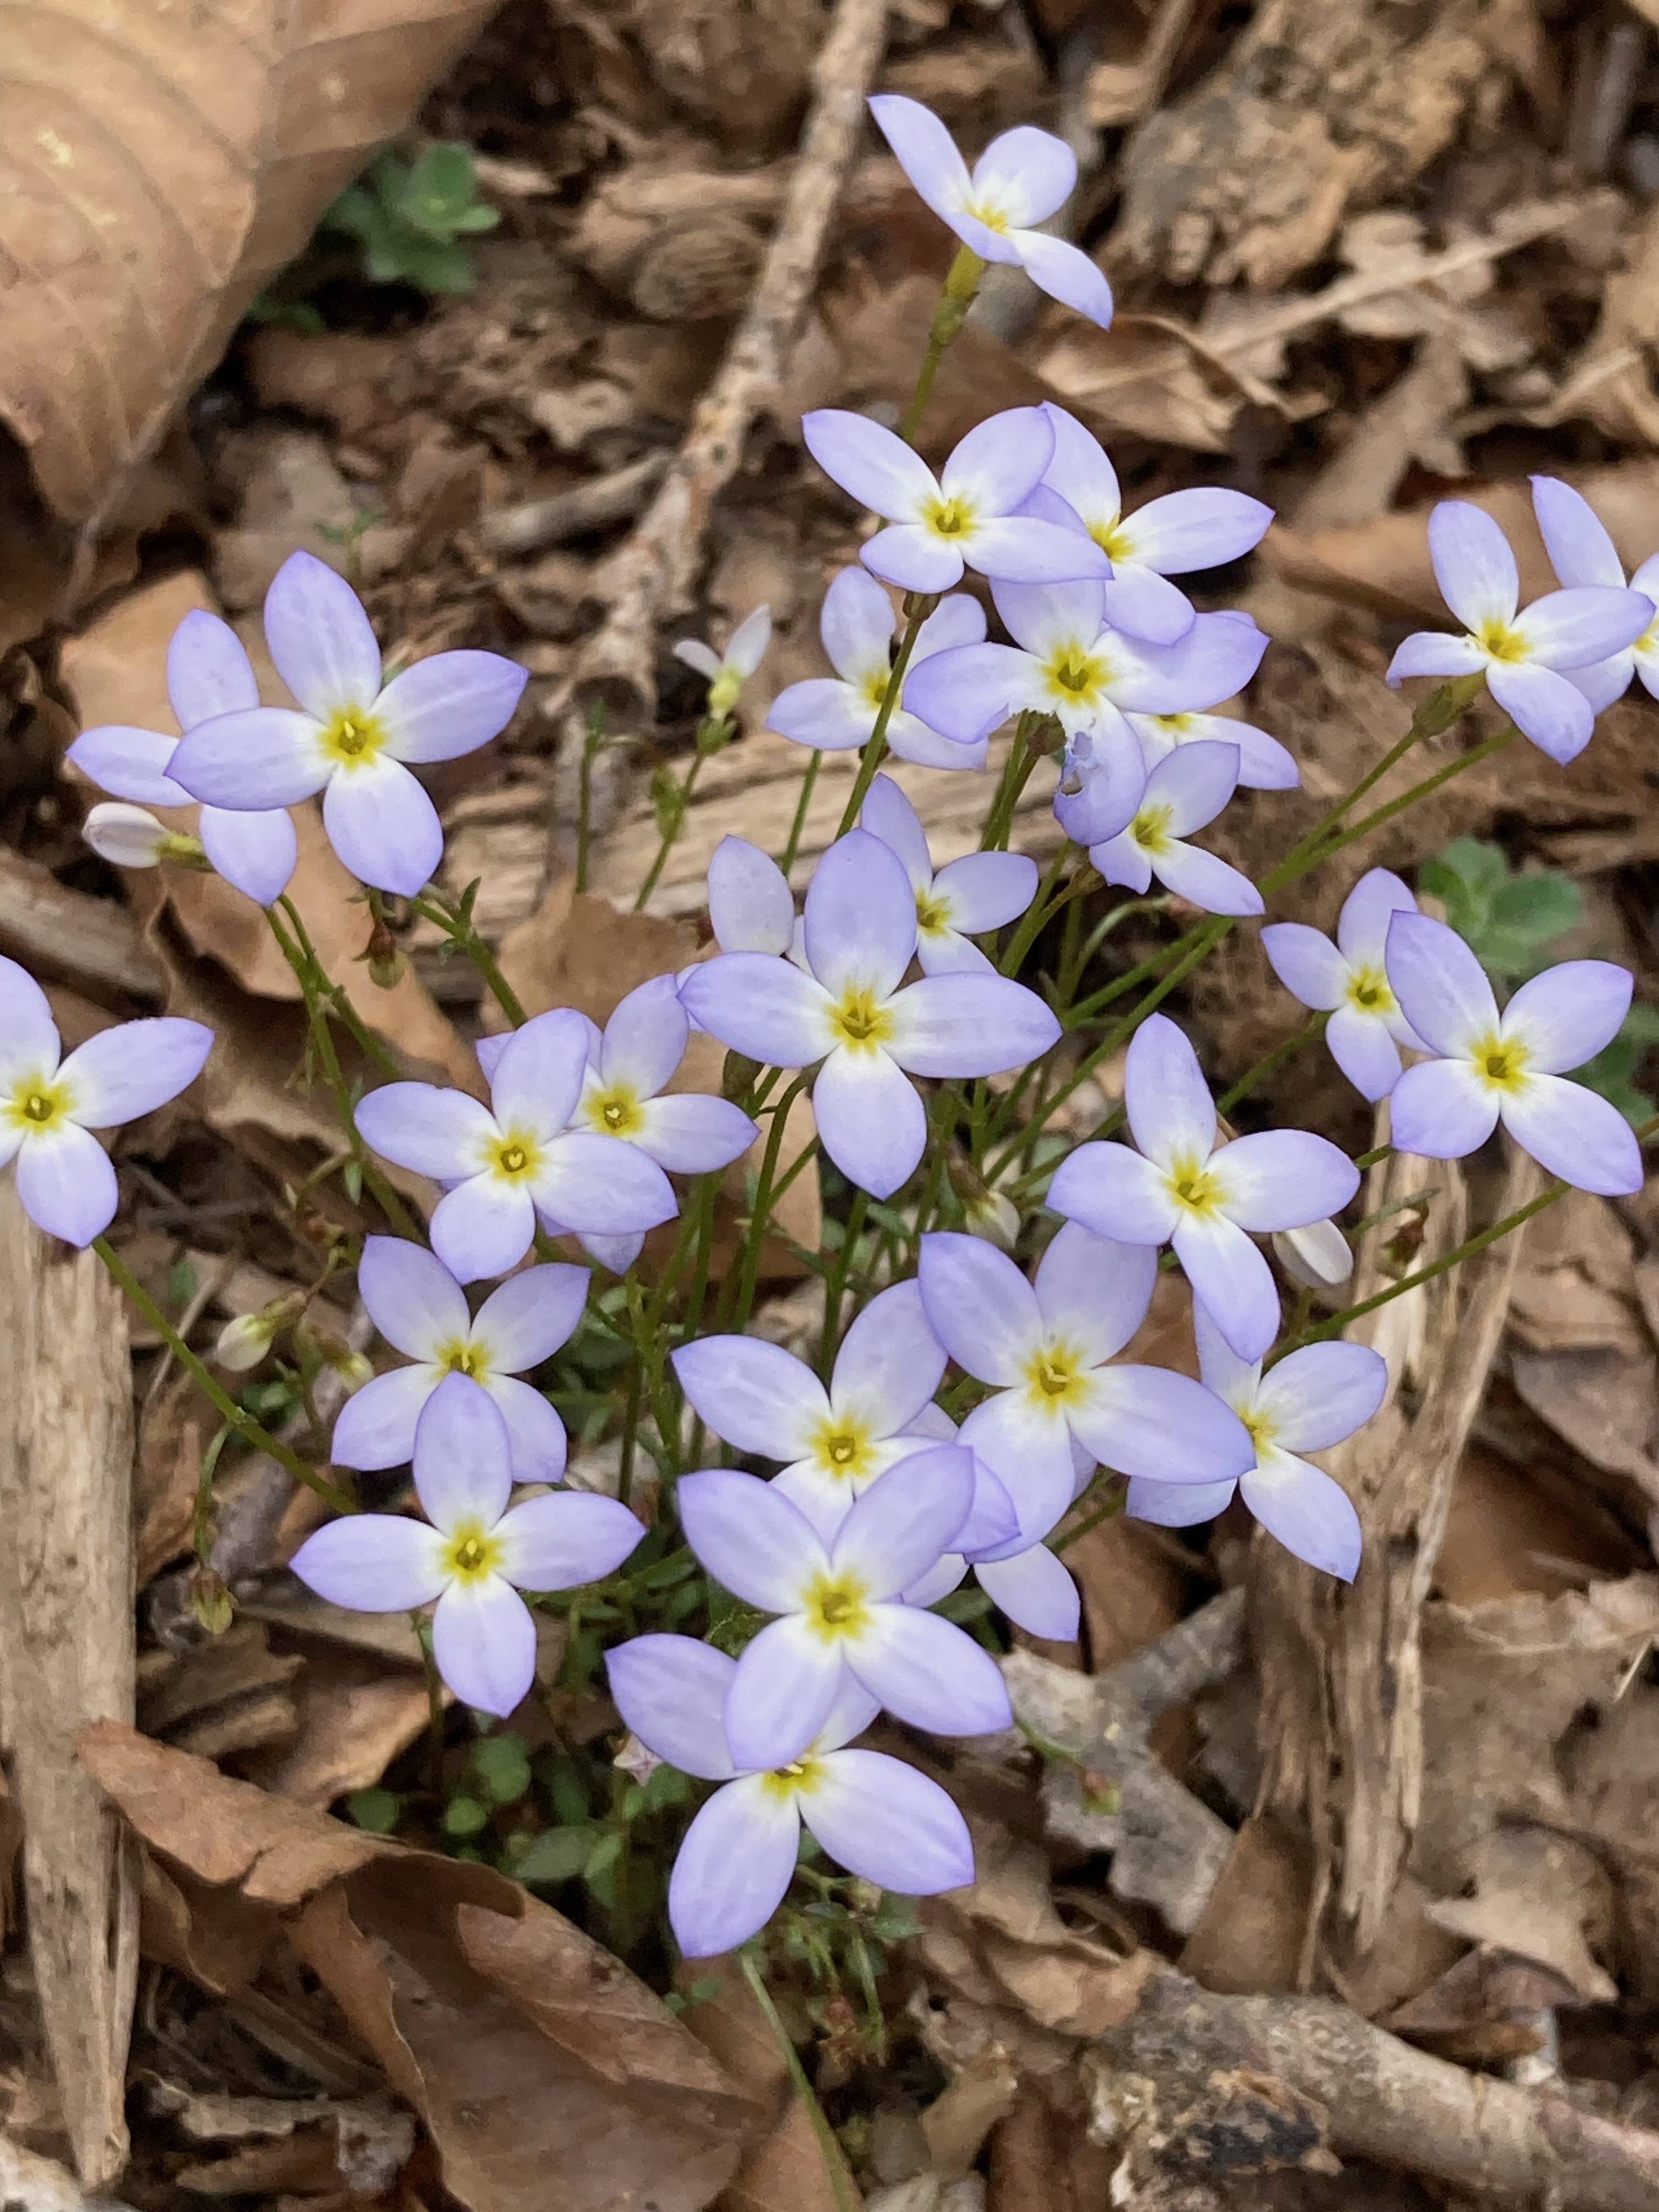 The Scientific Name is Houstonia caerulea. You will likely hear them called Quaker Ladies, Innocence, Common Bluet. This picture shows the Although small, they are surprisingly showy. of Houstonia caerulea